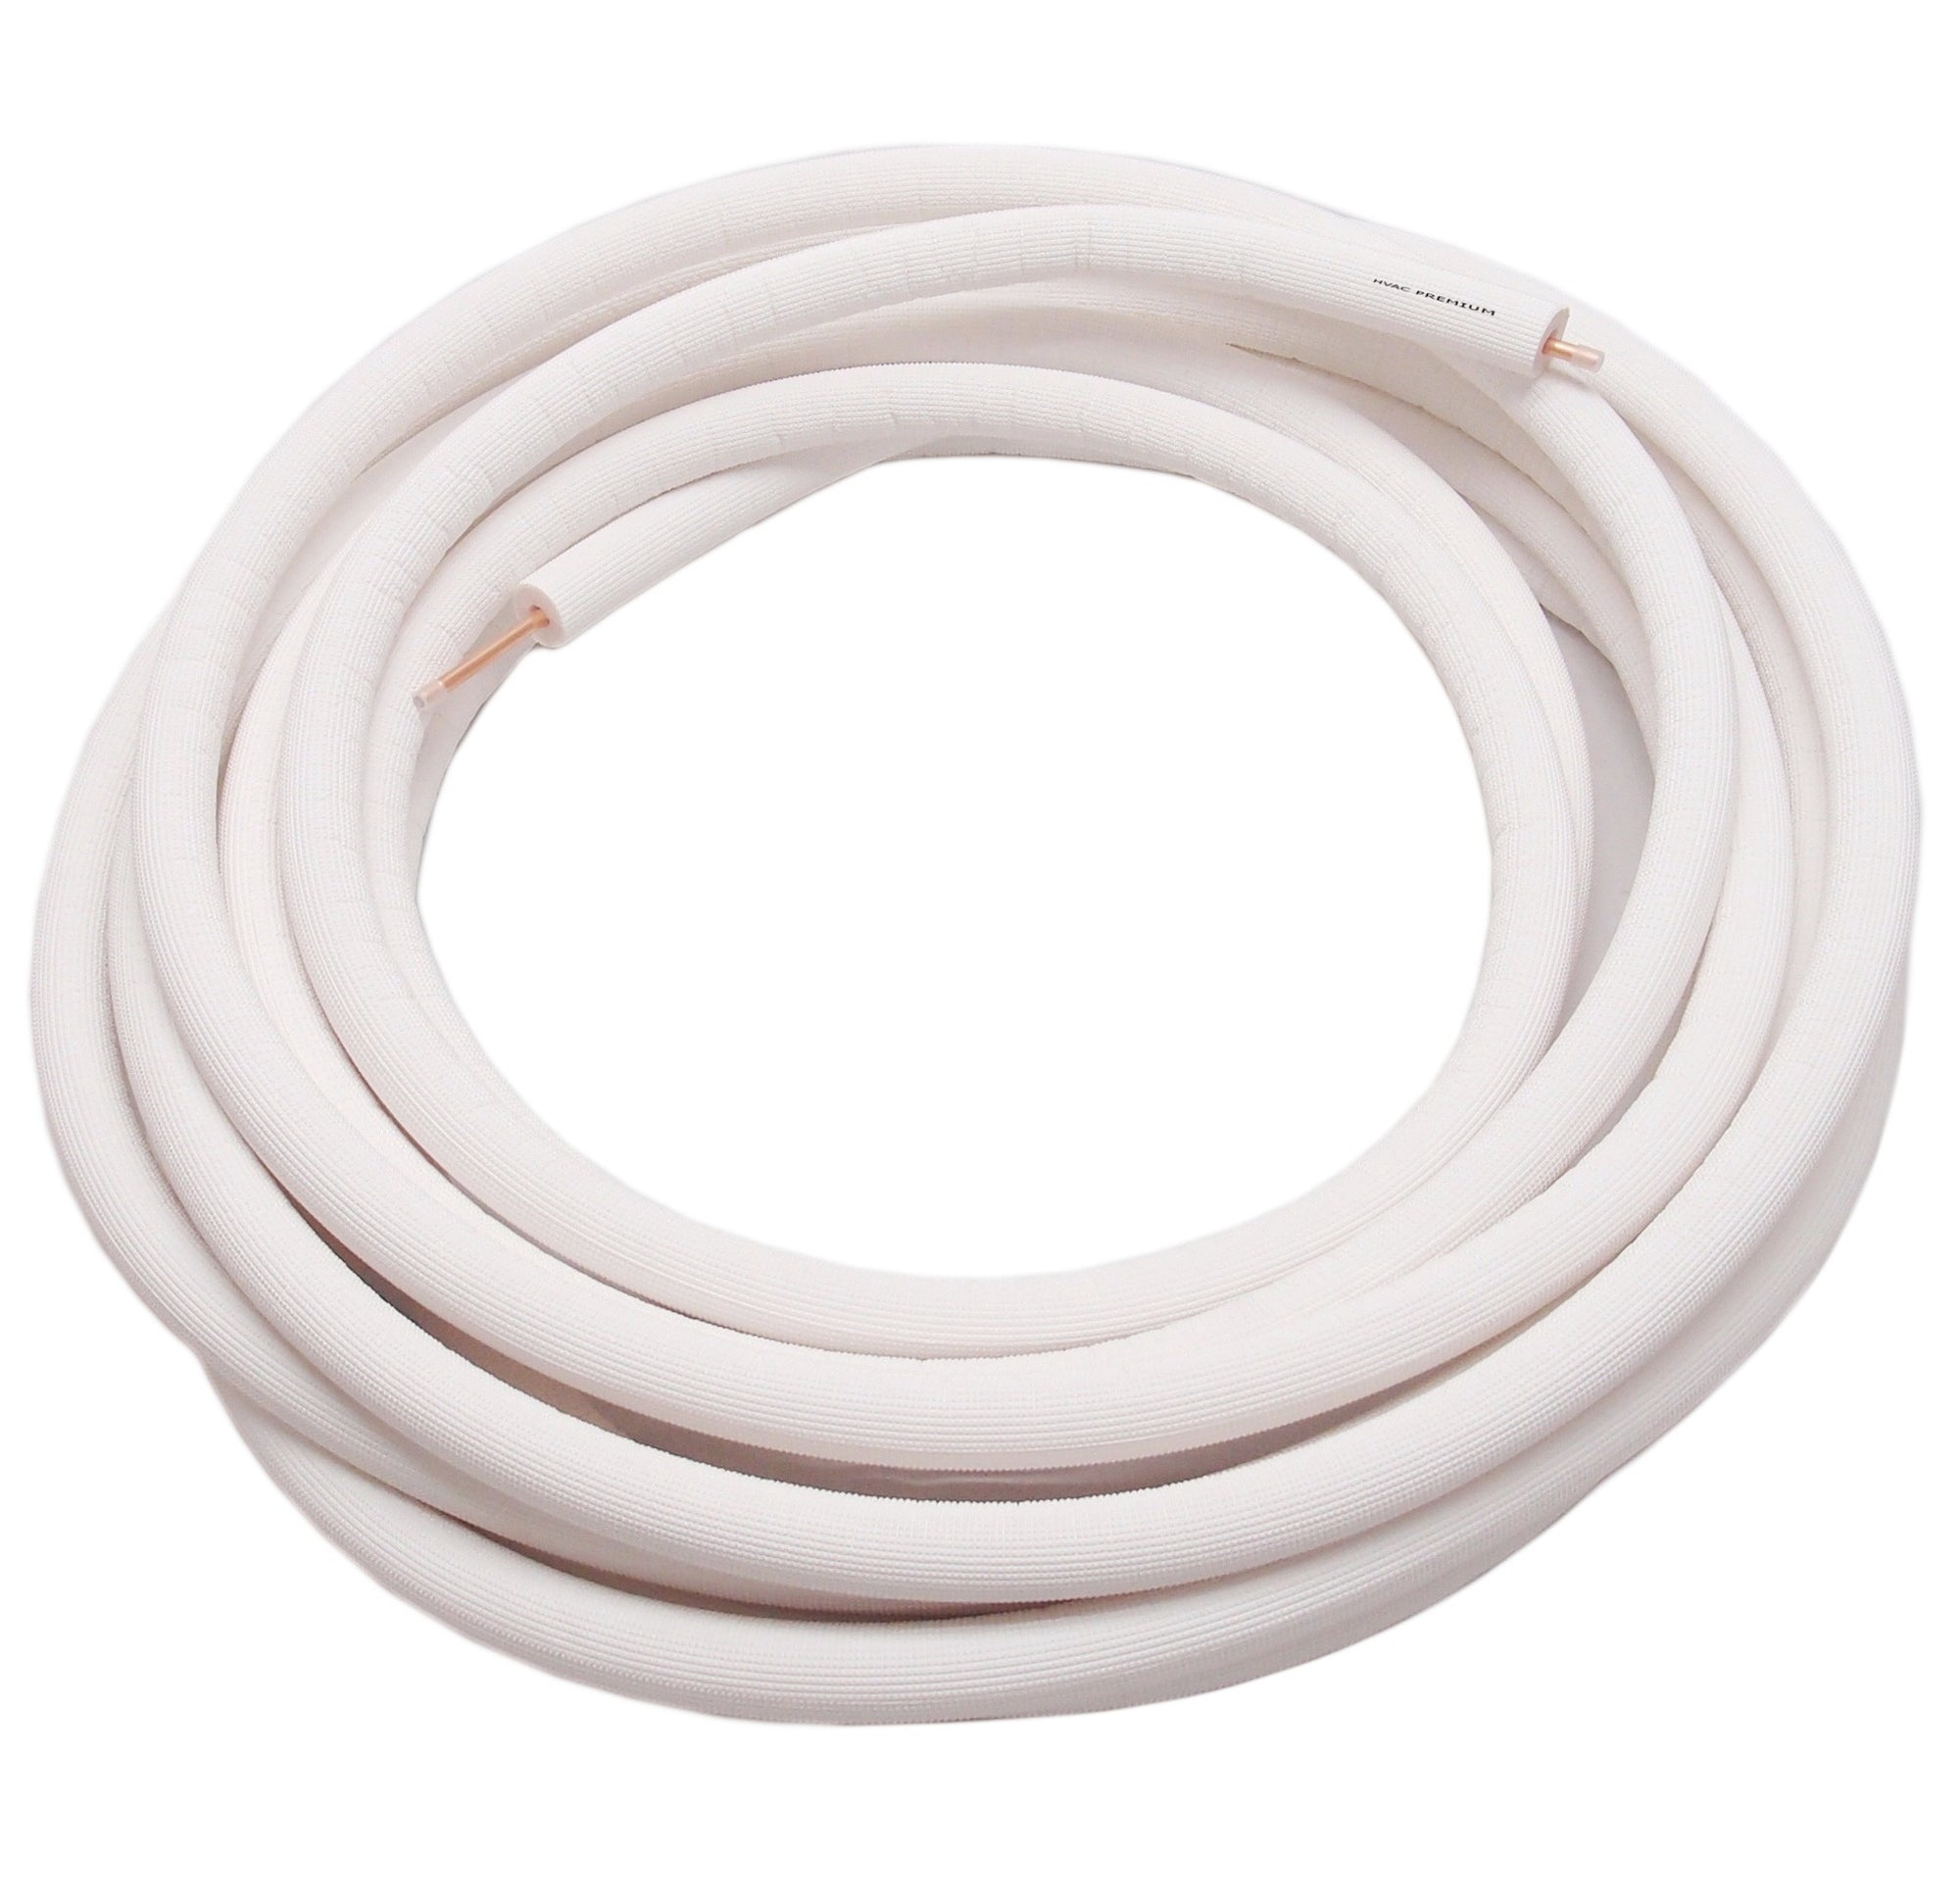 5/8" Insulated Copper Coil Line - Seamless Pipe Tube for HVAC, Refrigerant - 1/2" White Insulation - 15' Long